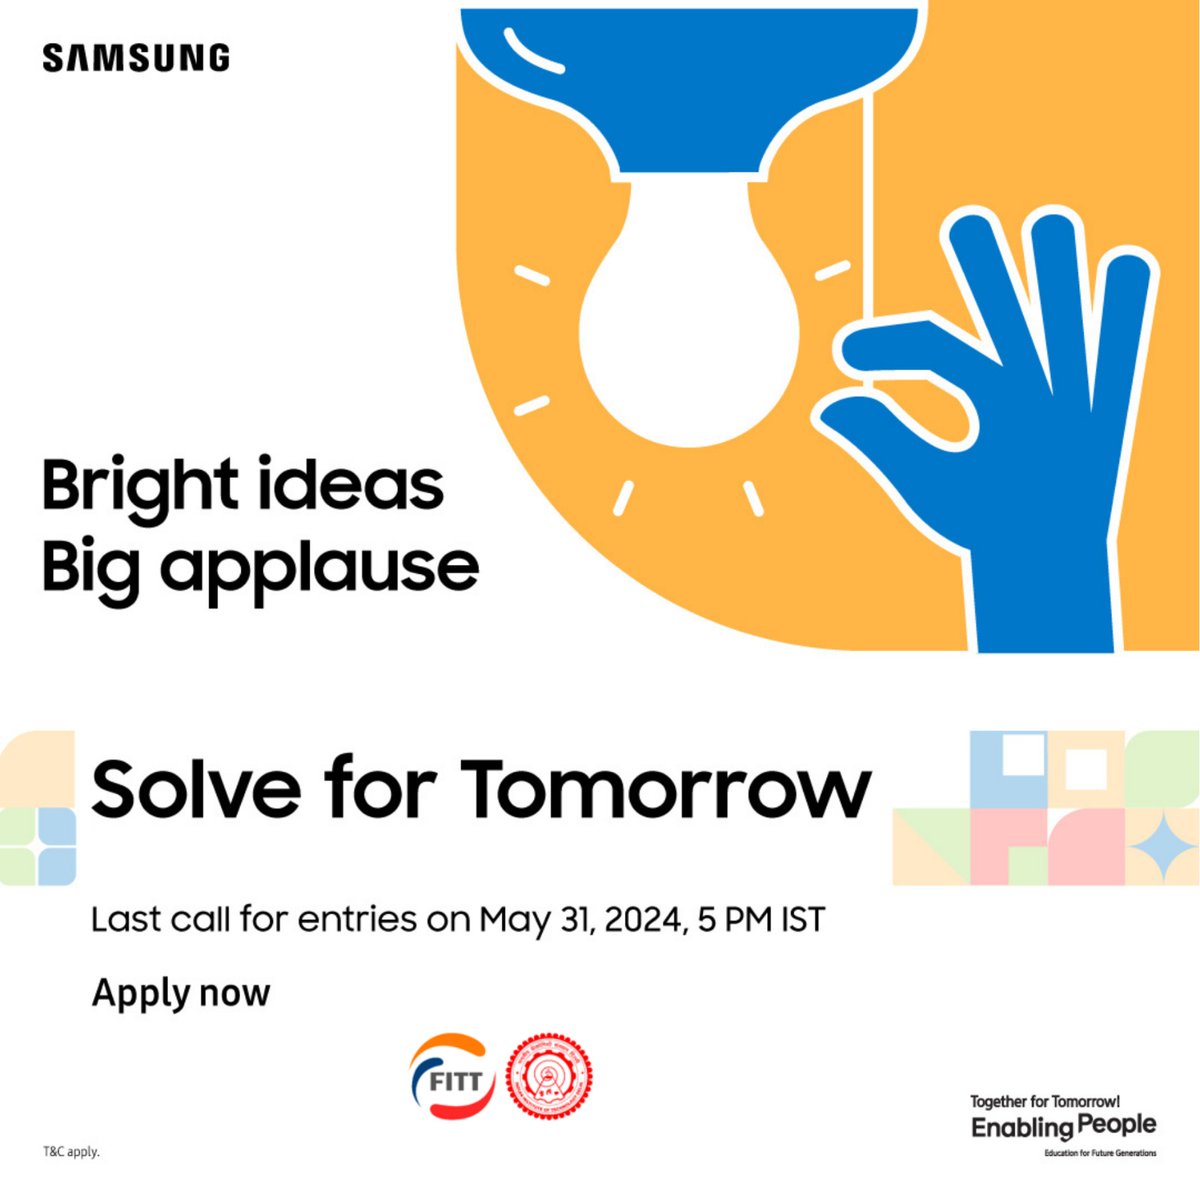 Feed your curiosity. Your big ideas can change the game. Let your passion out to Solve for Tomorrow.

Apply before May 31, 2024, 5 PM IST.

Click here to know more:

samsung.com/in/solvefortom…
#SFT_India_2024 #SolveForTomorrow #EnablingPeople #TogetherForTomorrow 
@skuast_kashmir